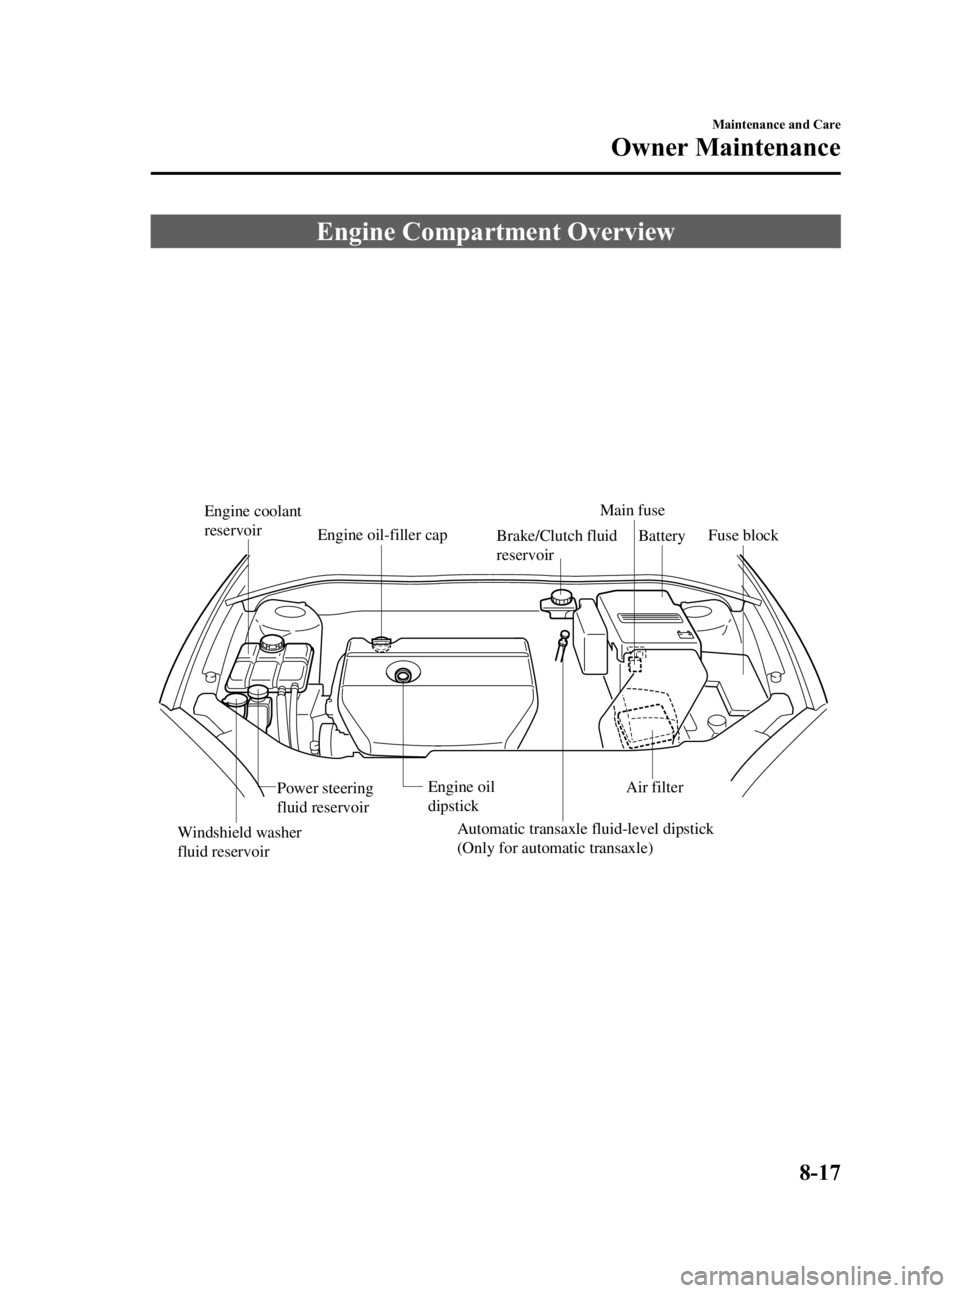 MAZDA MODEL 3 5-DOOR 2006  Owners Manual Black plate (265,1)
Engine Compartment Overview
Fuse block
Air filterBattery
Engine oil-filler cap Main fuse
Automatic transaxle fluid-level dipstick 
(Only for automatic transaxle) Brake/Clutch fluid